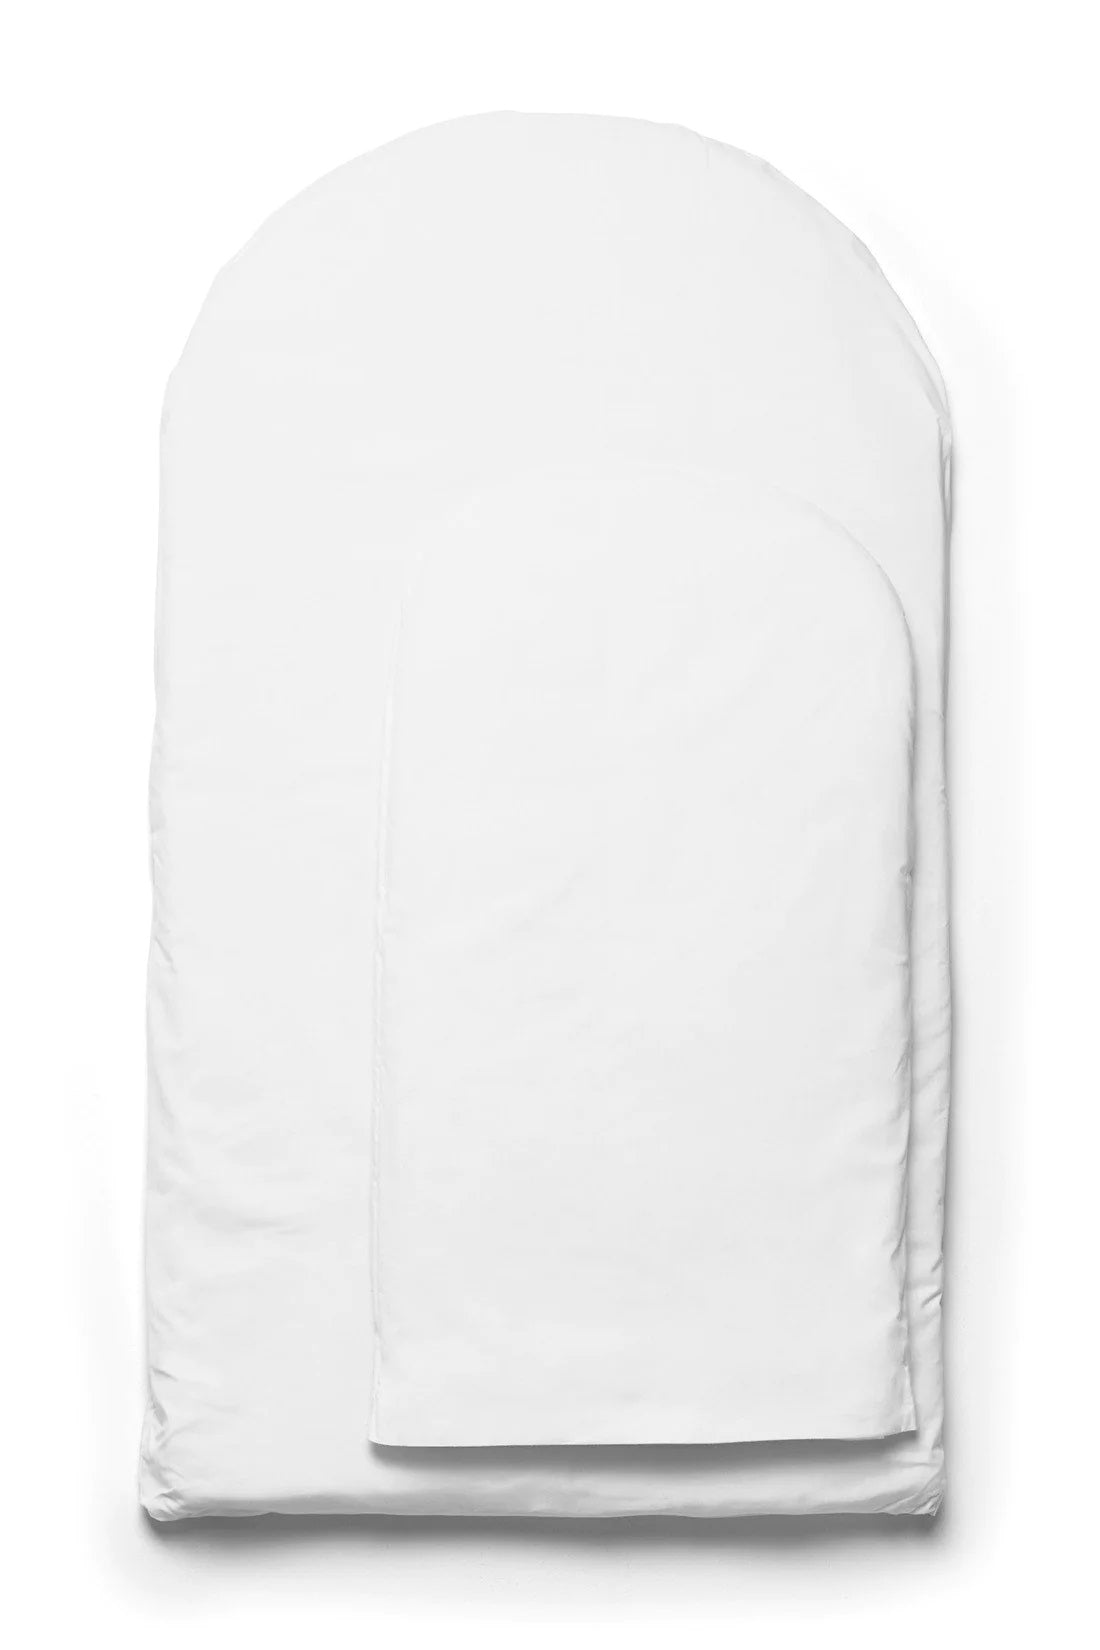 DockATot replacement pad deluxe+ grand, white color, top view